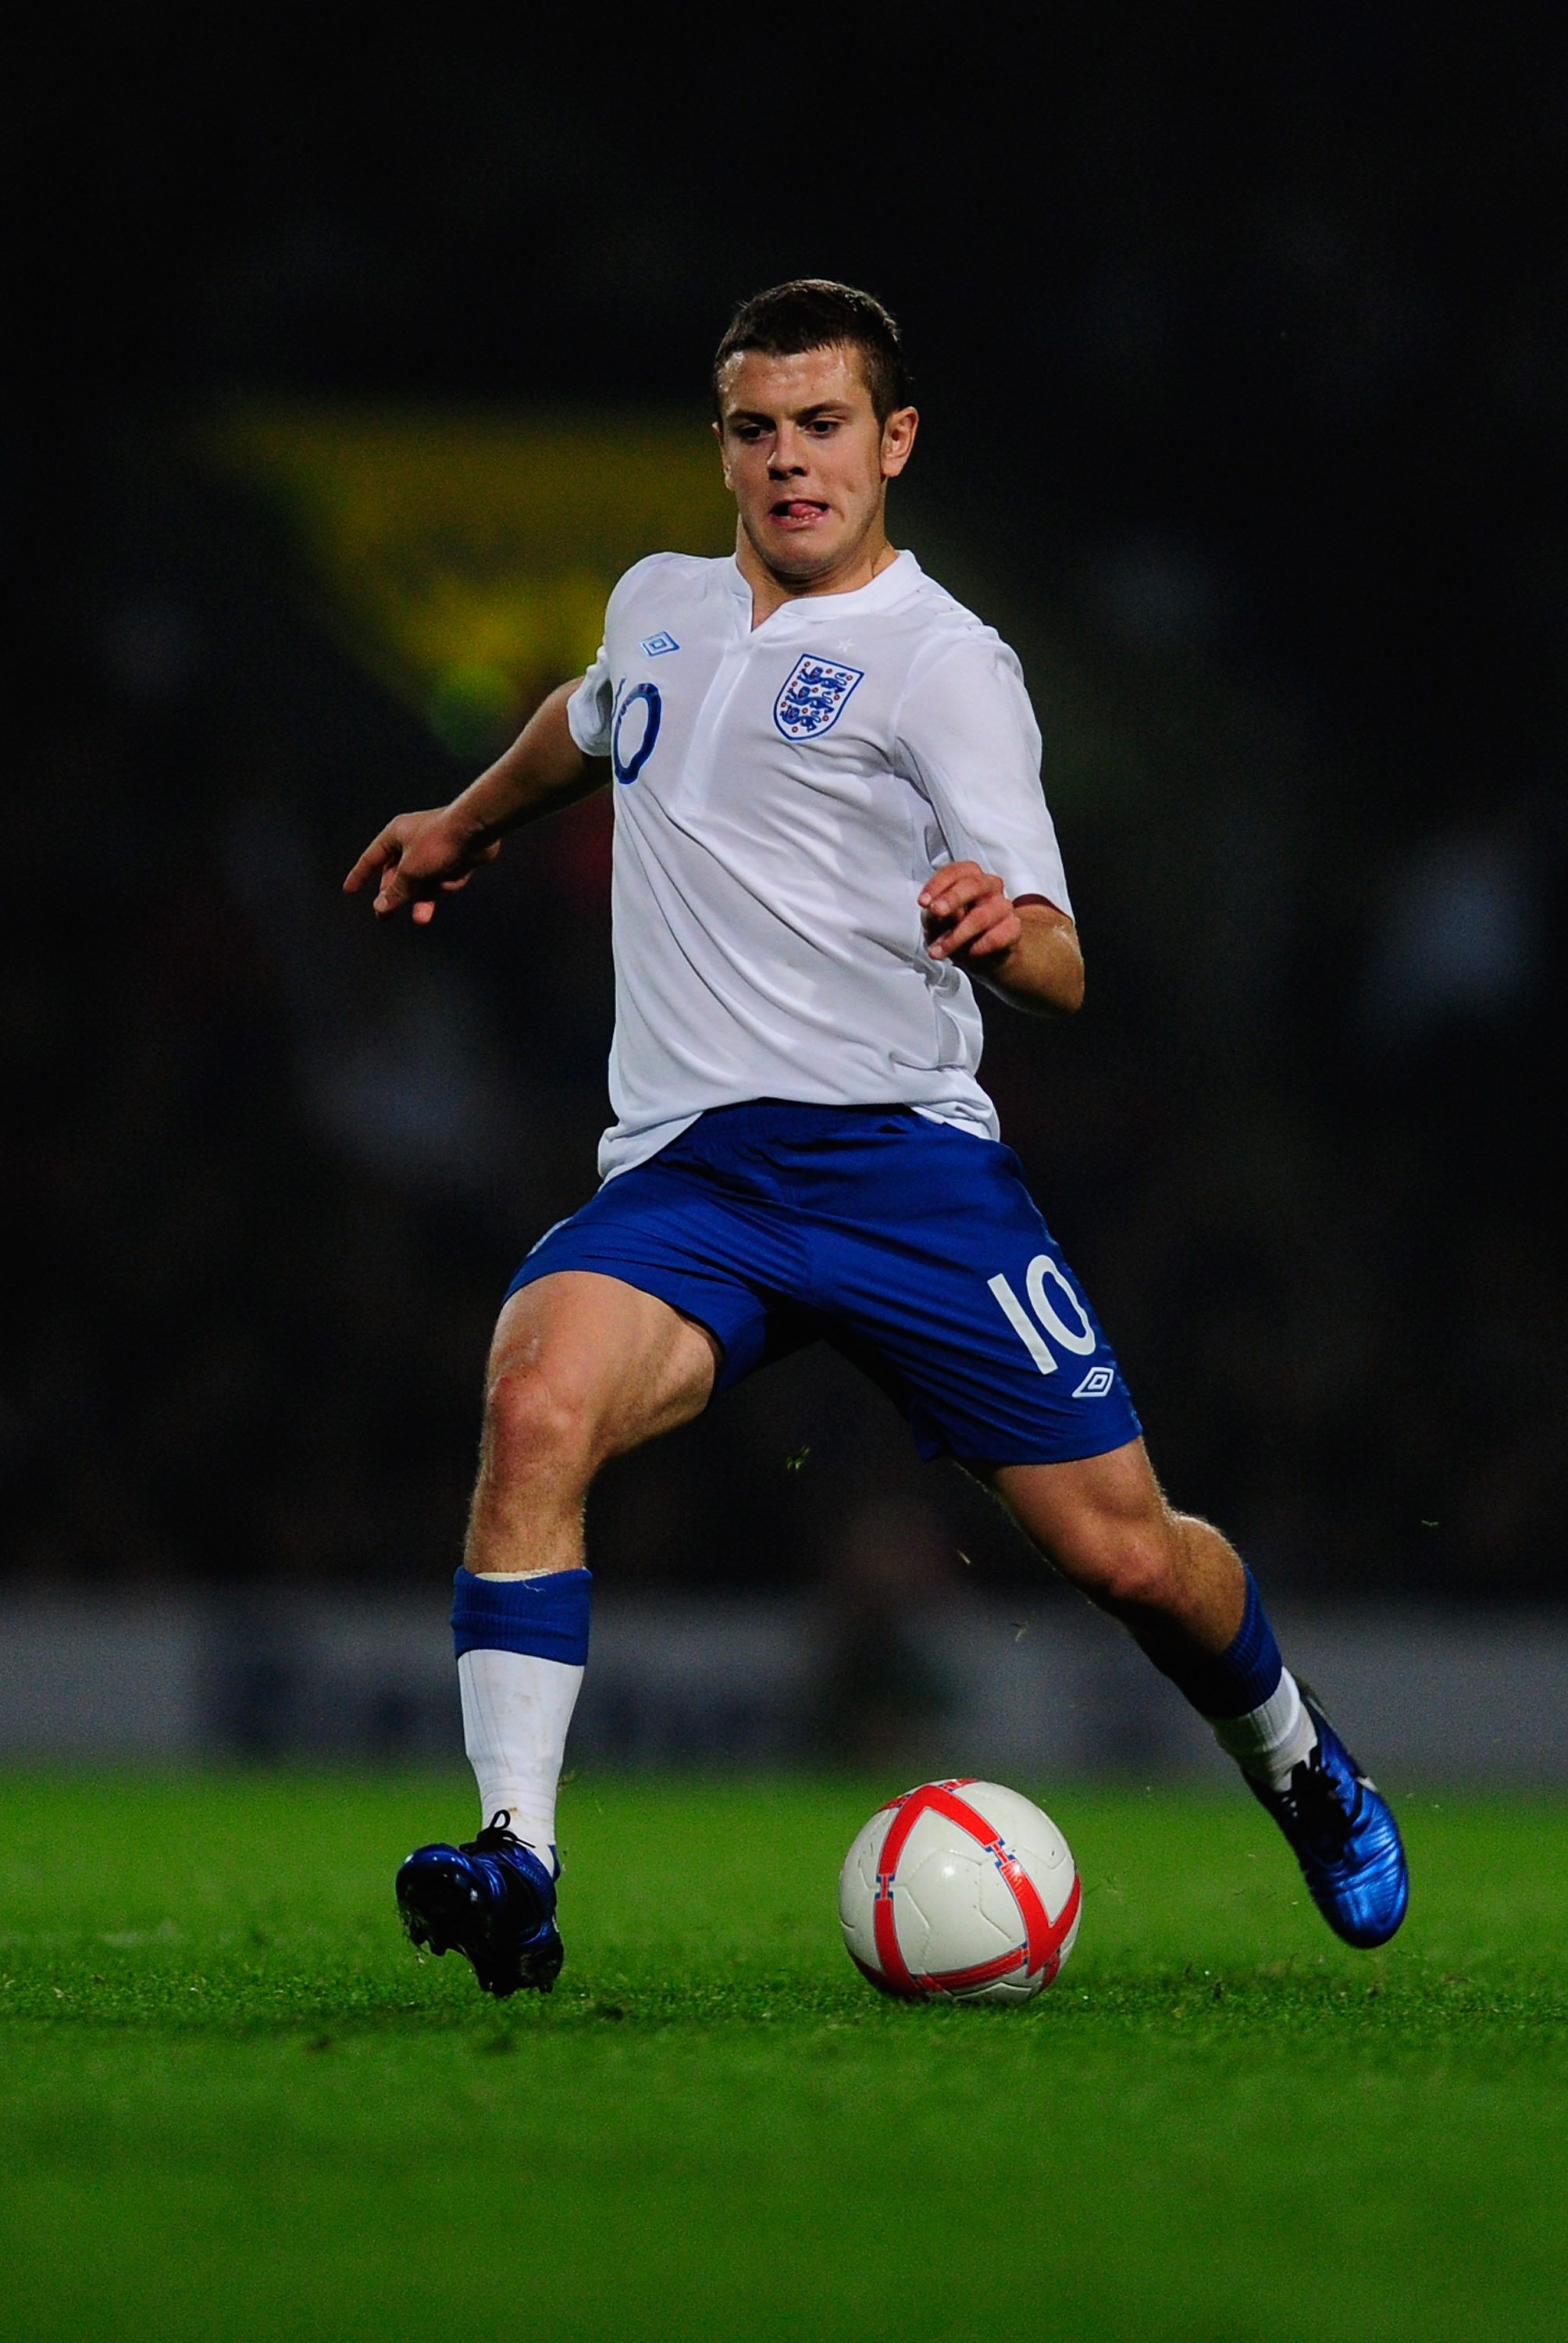 NORWICH, ENGLAND - OCTOBER 08:  Jack Wilshere of England in action during the UEFA U21 Championship Play-Off, First Leg match between England and Romania at Carrow Road on October 8, 2010 in Norwich, England.  (Photo by Jamie McDonald/Getty Images)